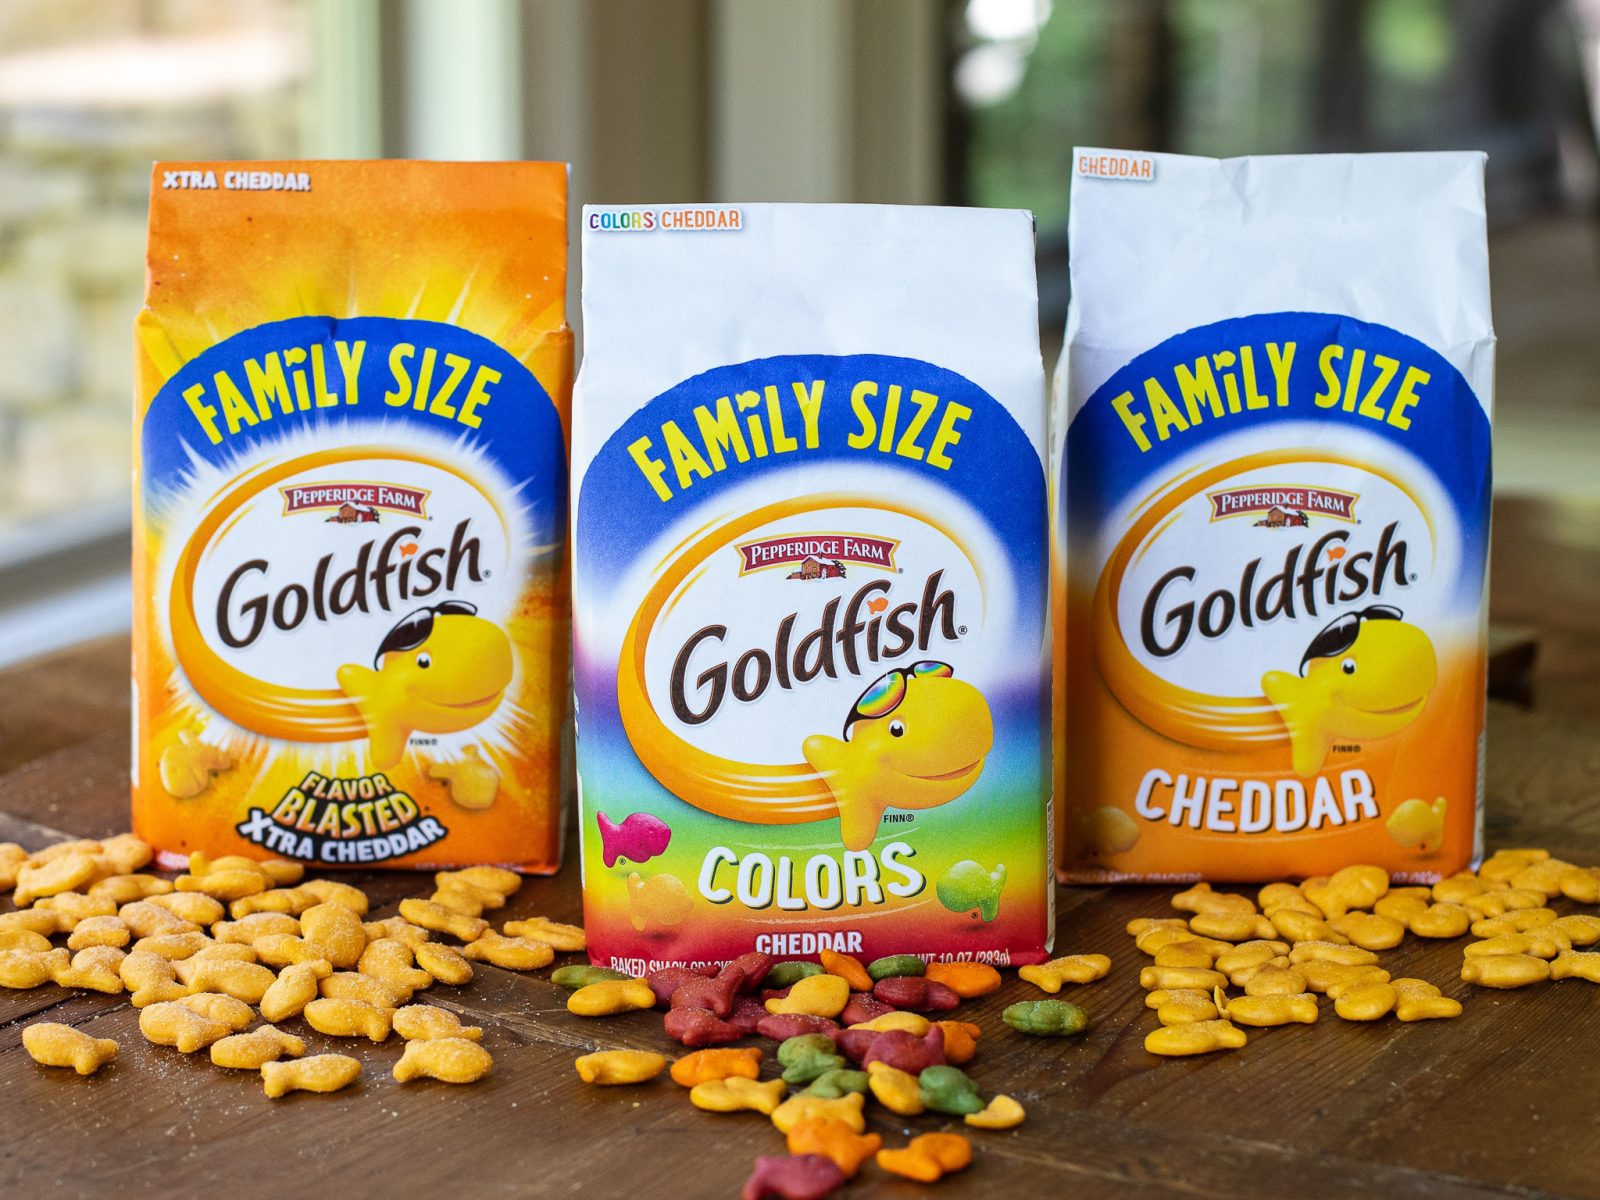 Get Savings On Family Size Pepperidge Farm® Goldfish® Crackers At Publix – Go For The Handful!